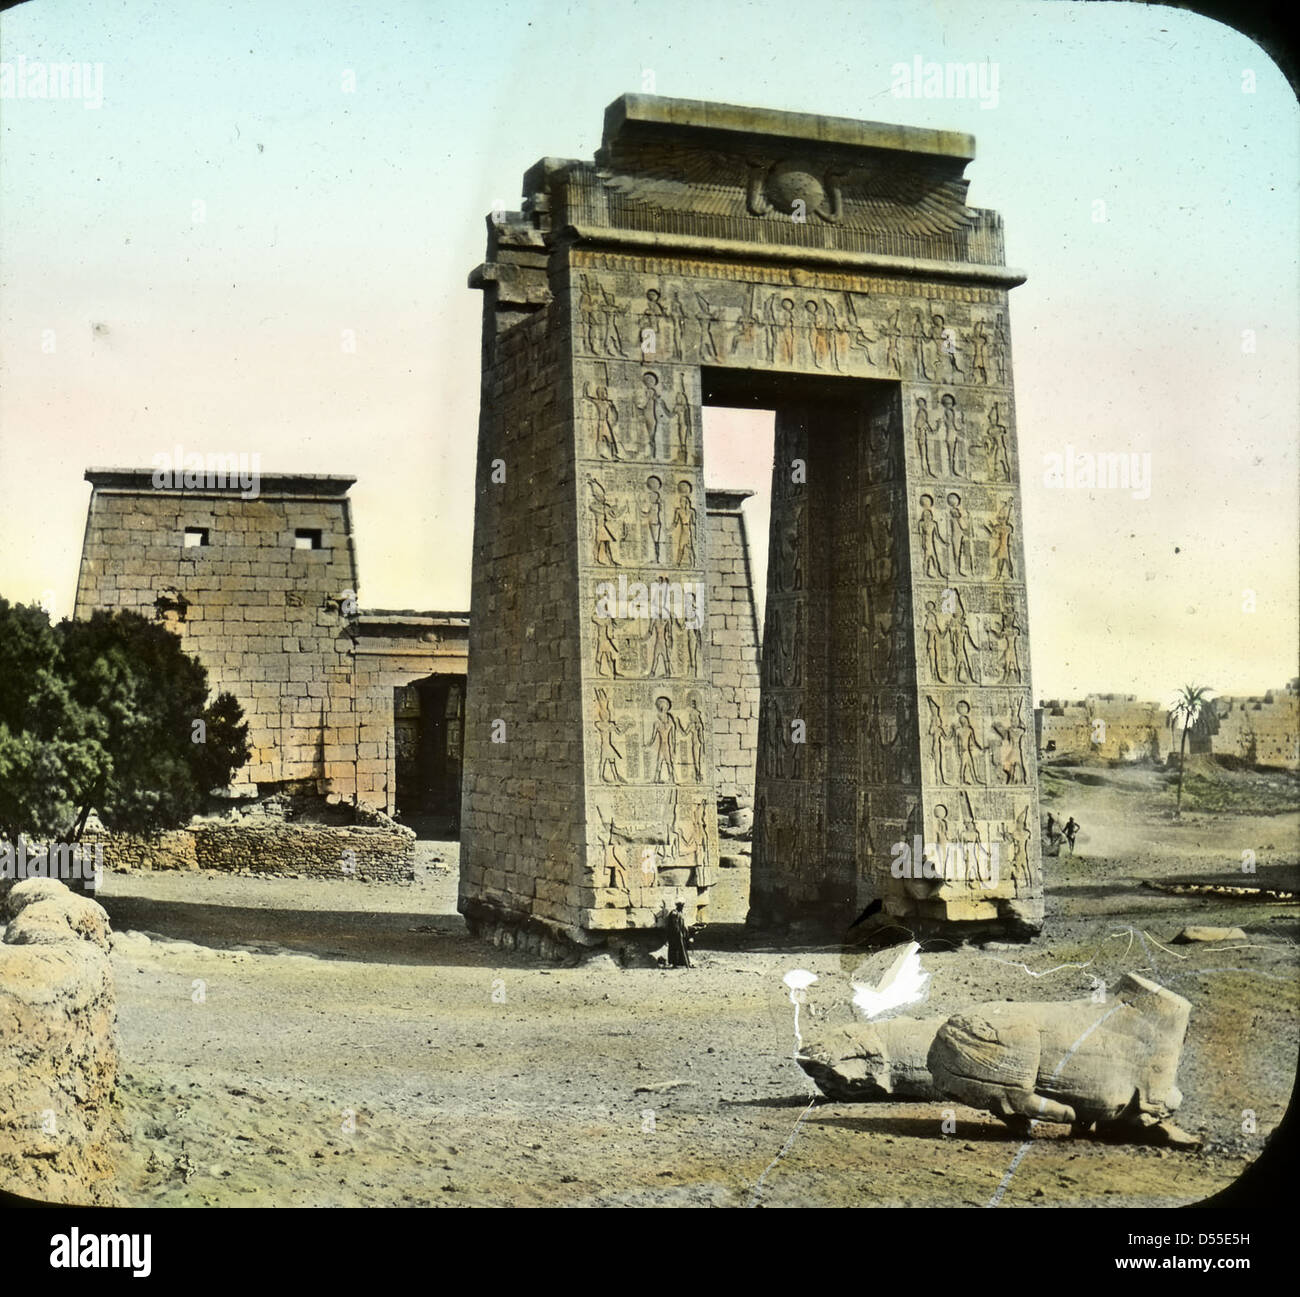 Egypt: Karnak. View of the Karnak temple precinct, gate of Ptolemy III, with the temple of Khonsu in the background Stock Photo